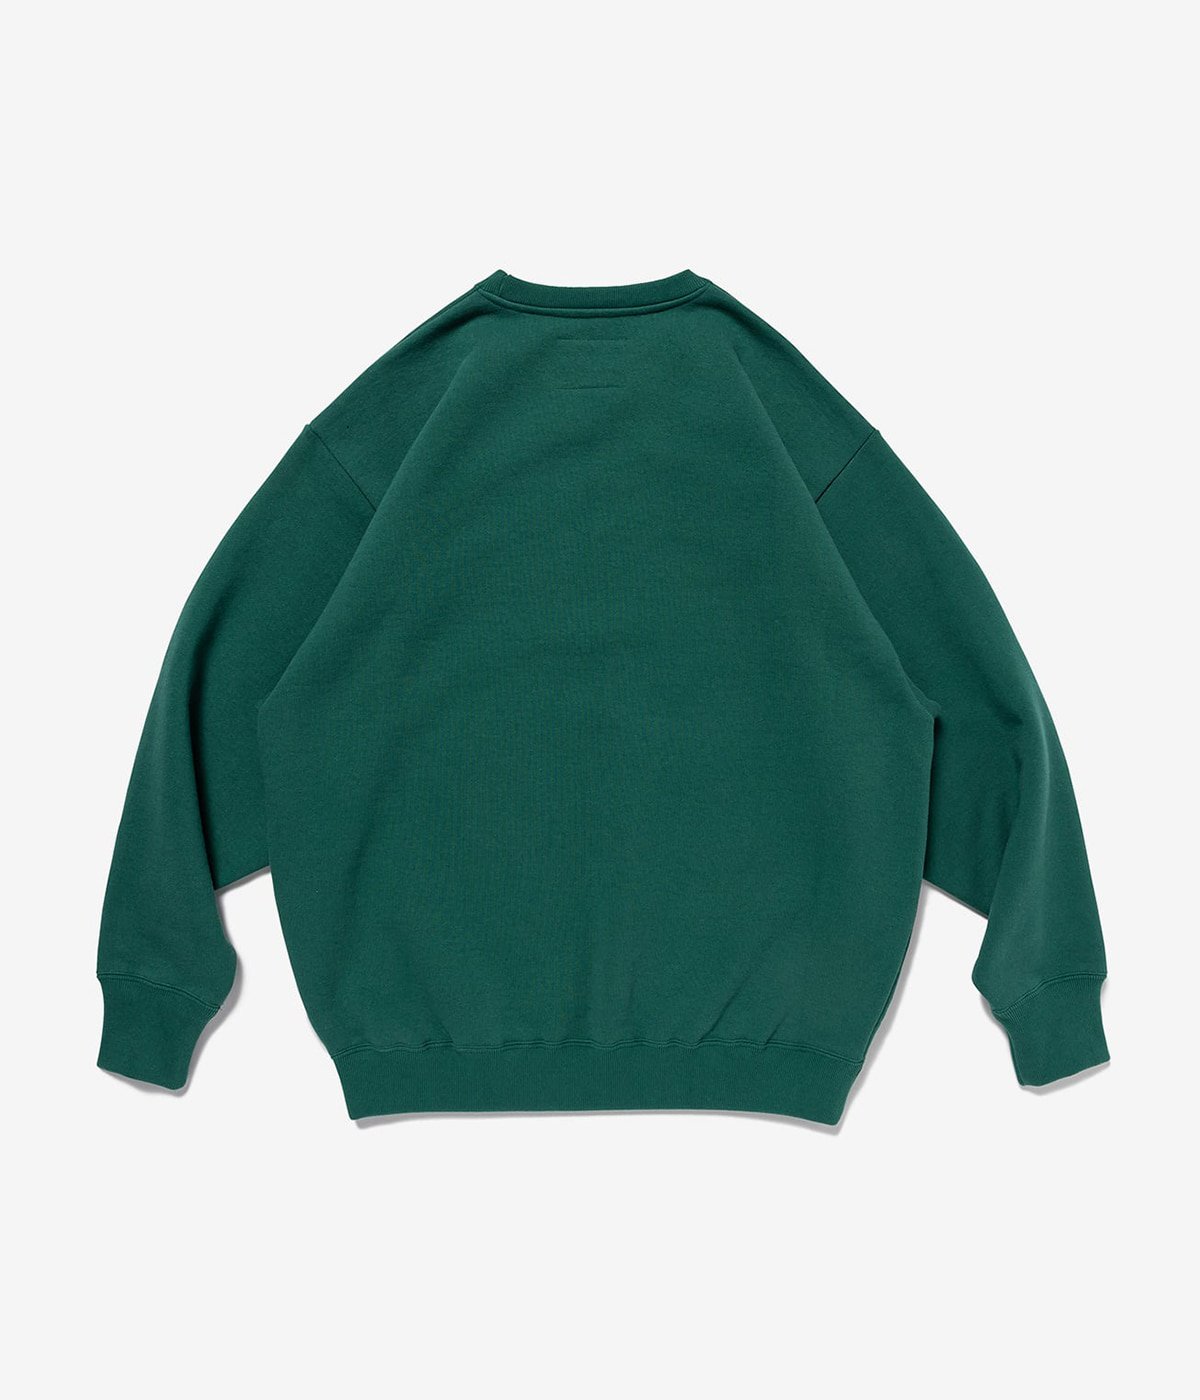 ACADEMY / SWEATER / COTTON. COLLEGE | WTAPS(ダブルタップス 